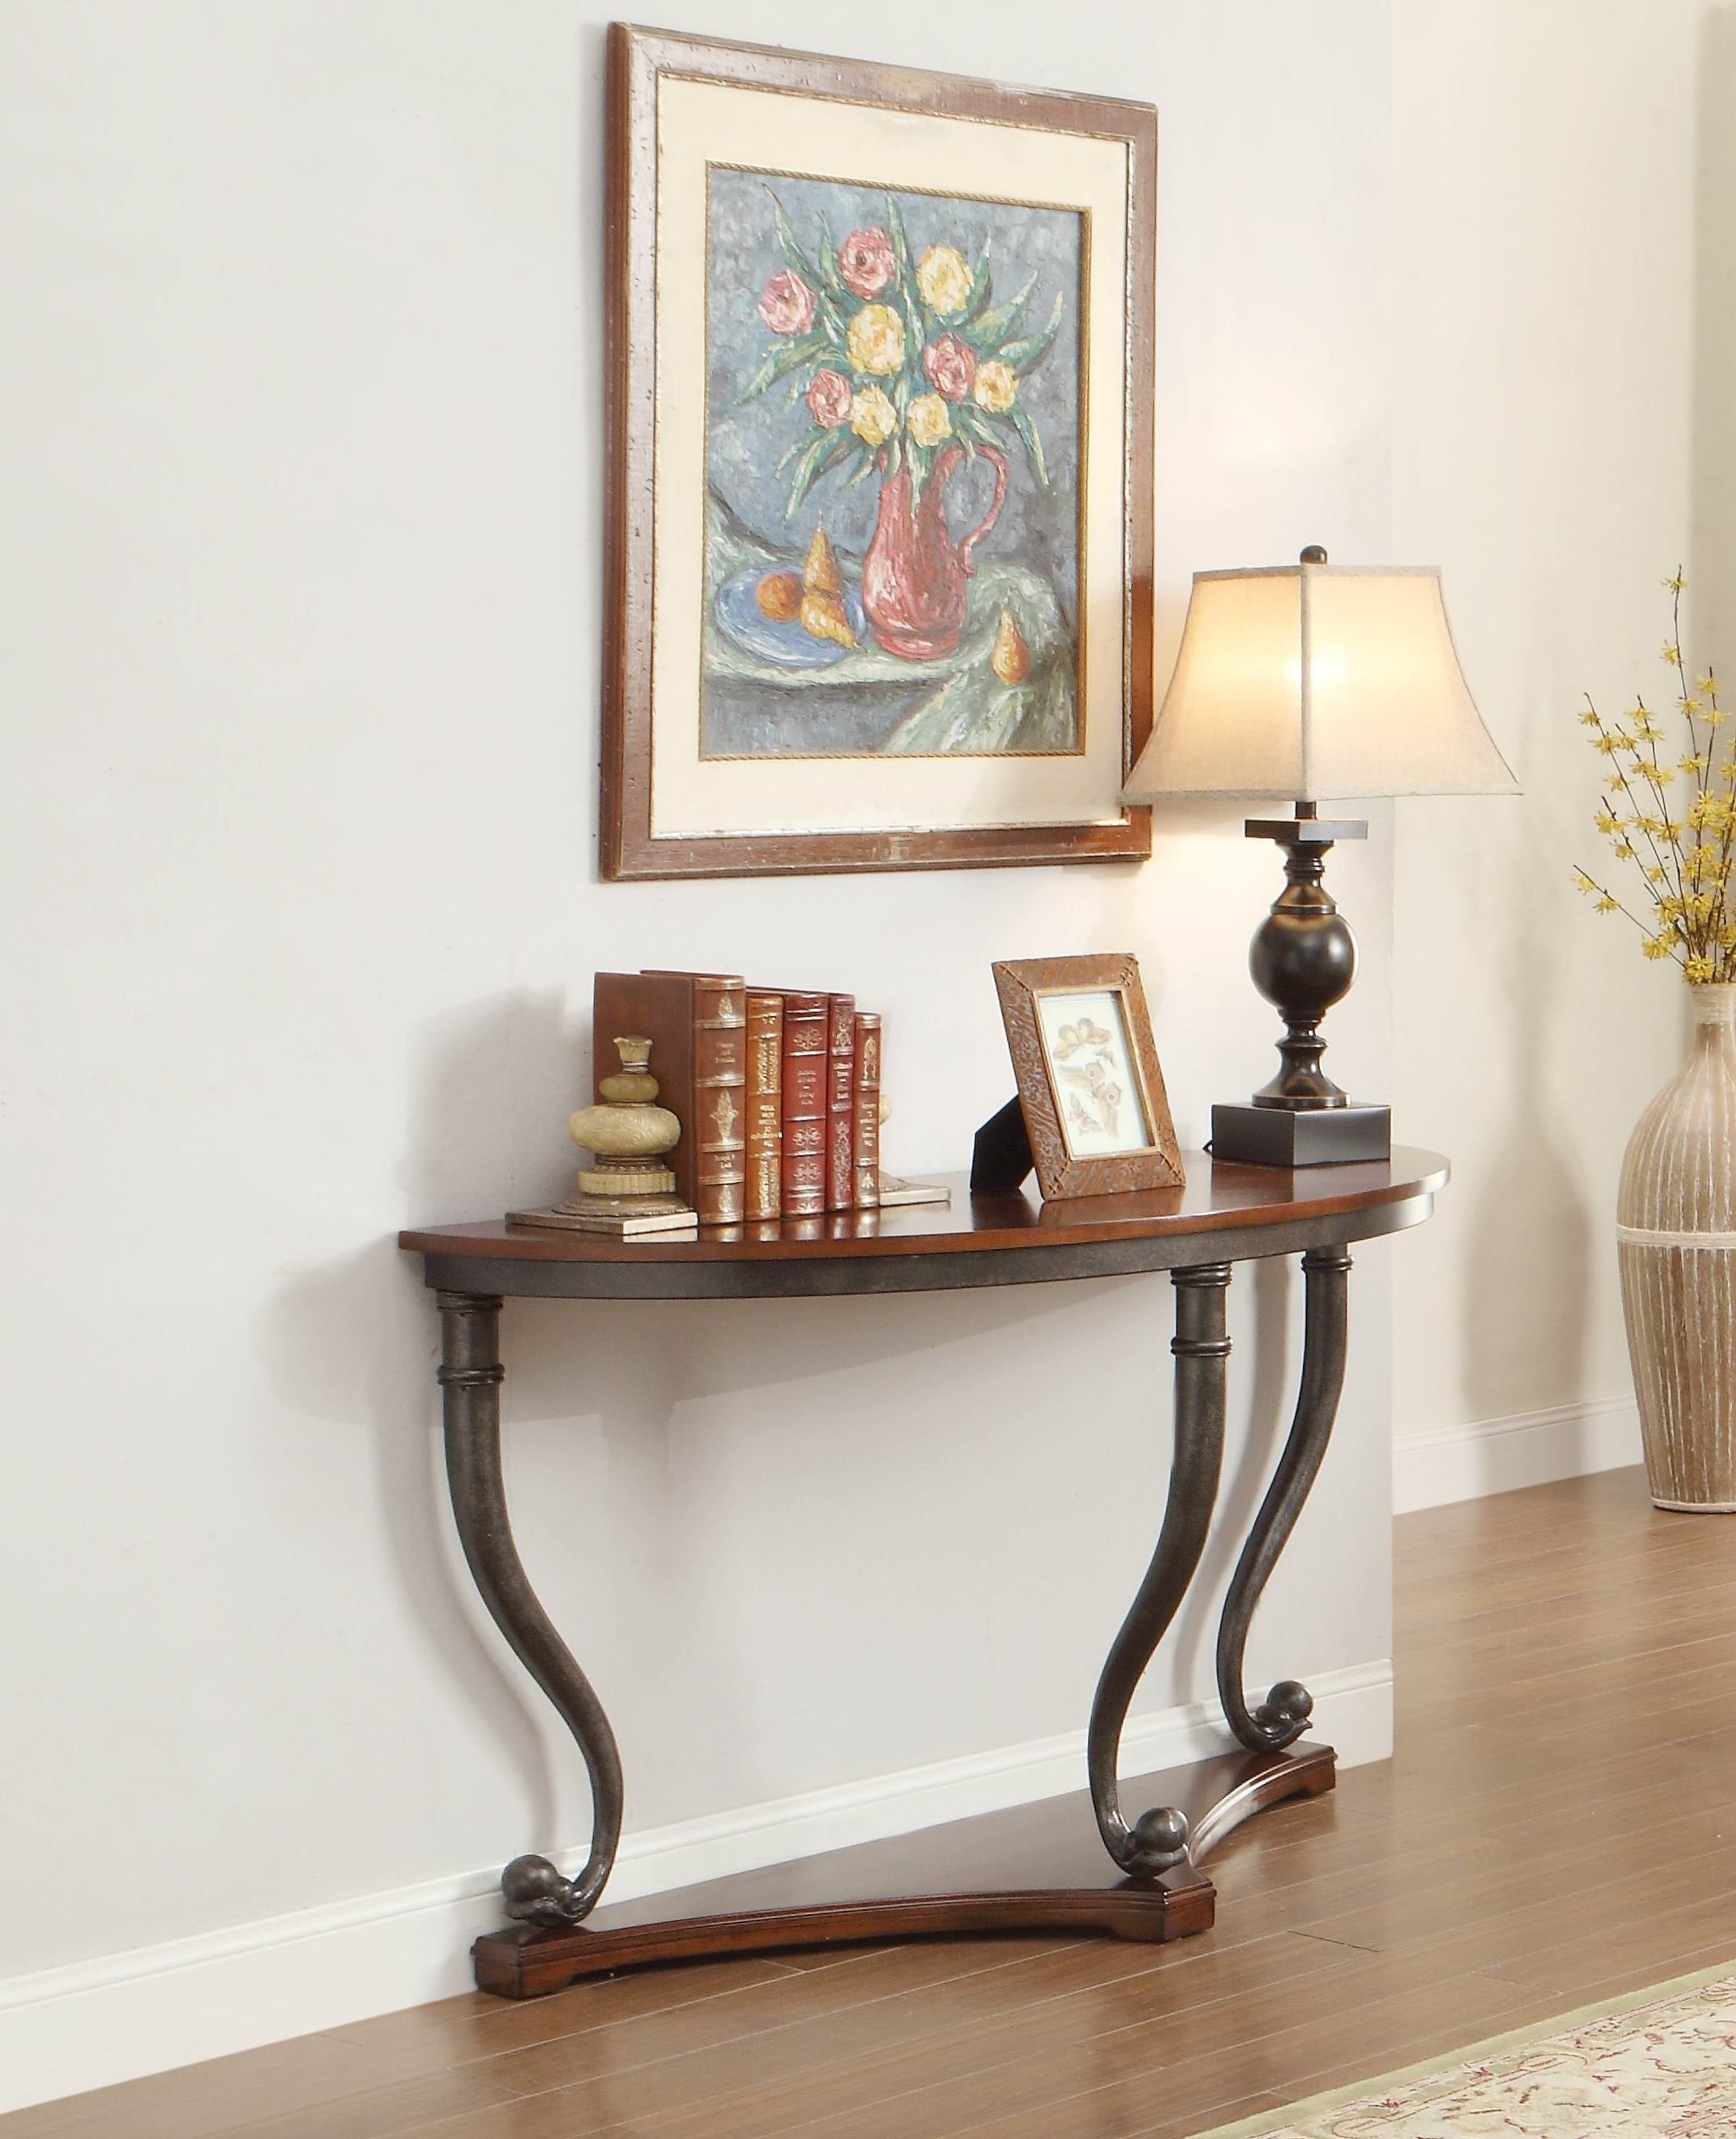 Panne Traditional Warm Cherry Wood Sofa Table | The Classy Home Pertaining To Heartwood Cherry Wood Console Tables (View 14 of 20)